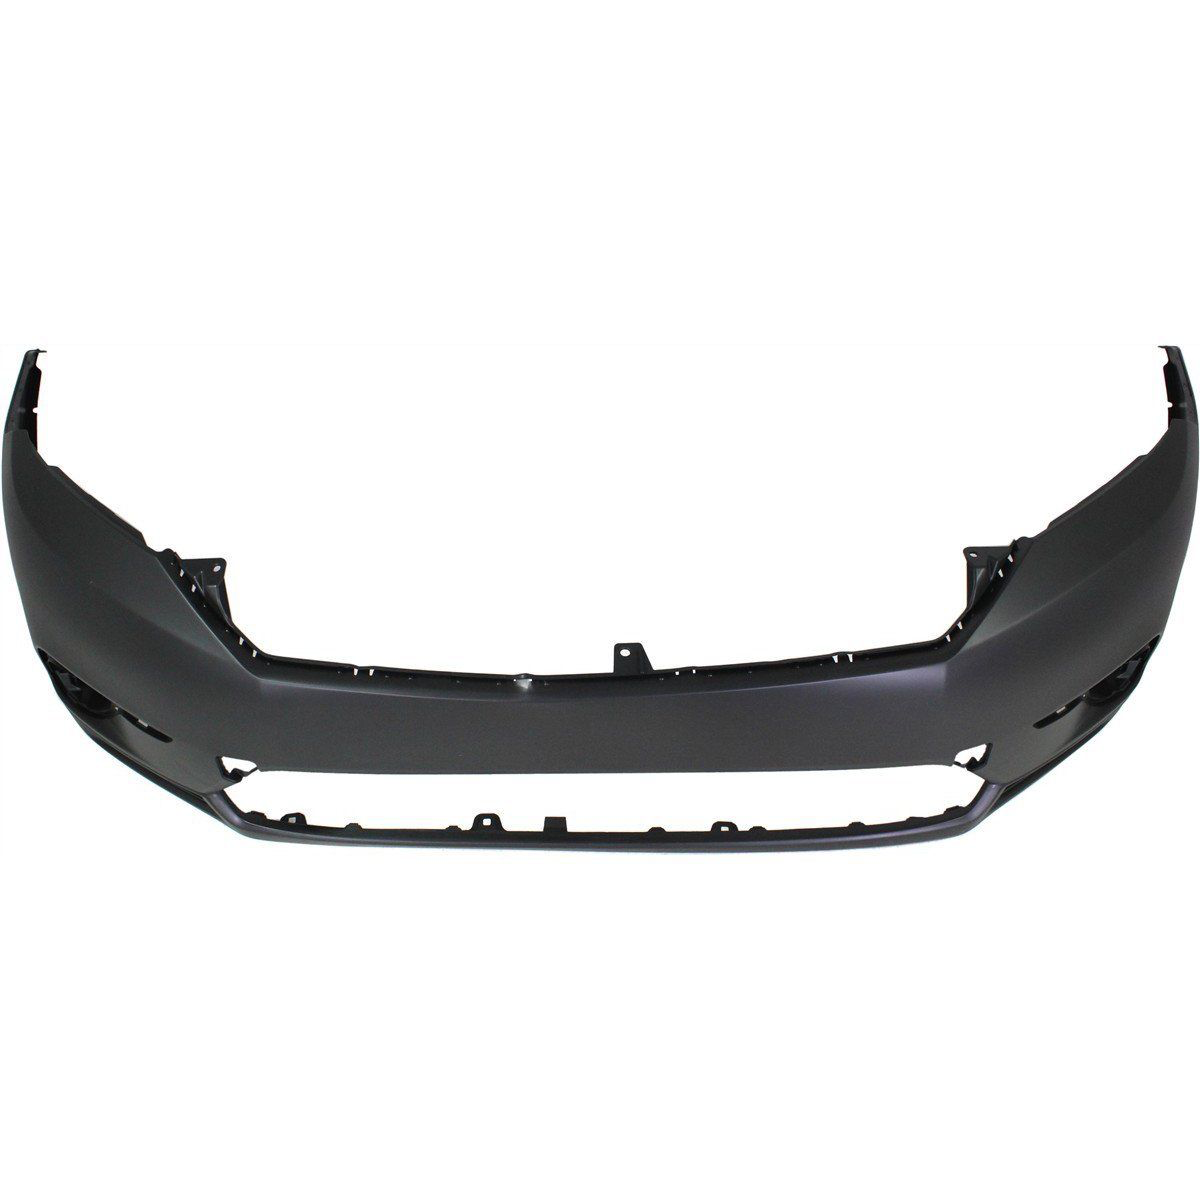 2011-2013 TOYOTA HIGHLANDER Front Bumper Cover Painted to Match